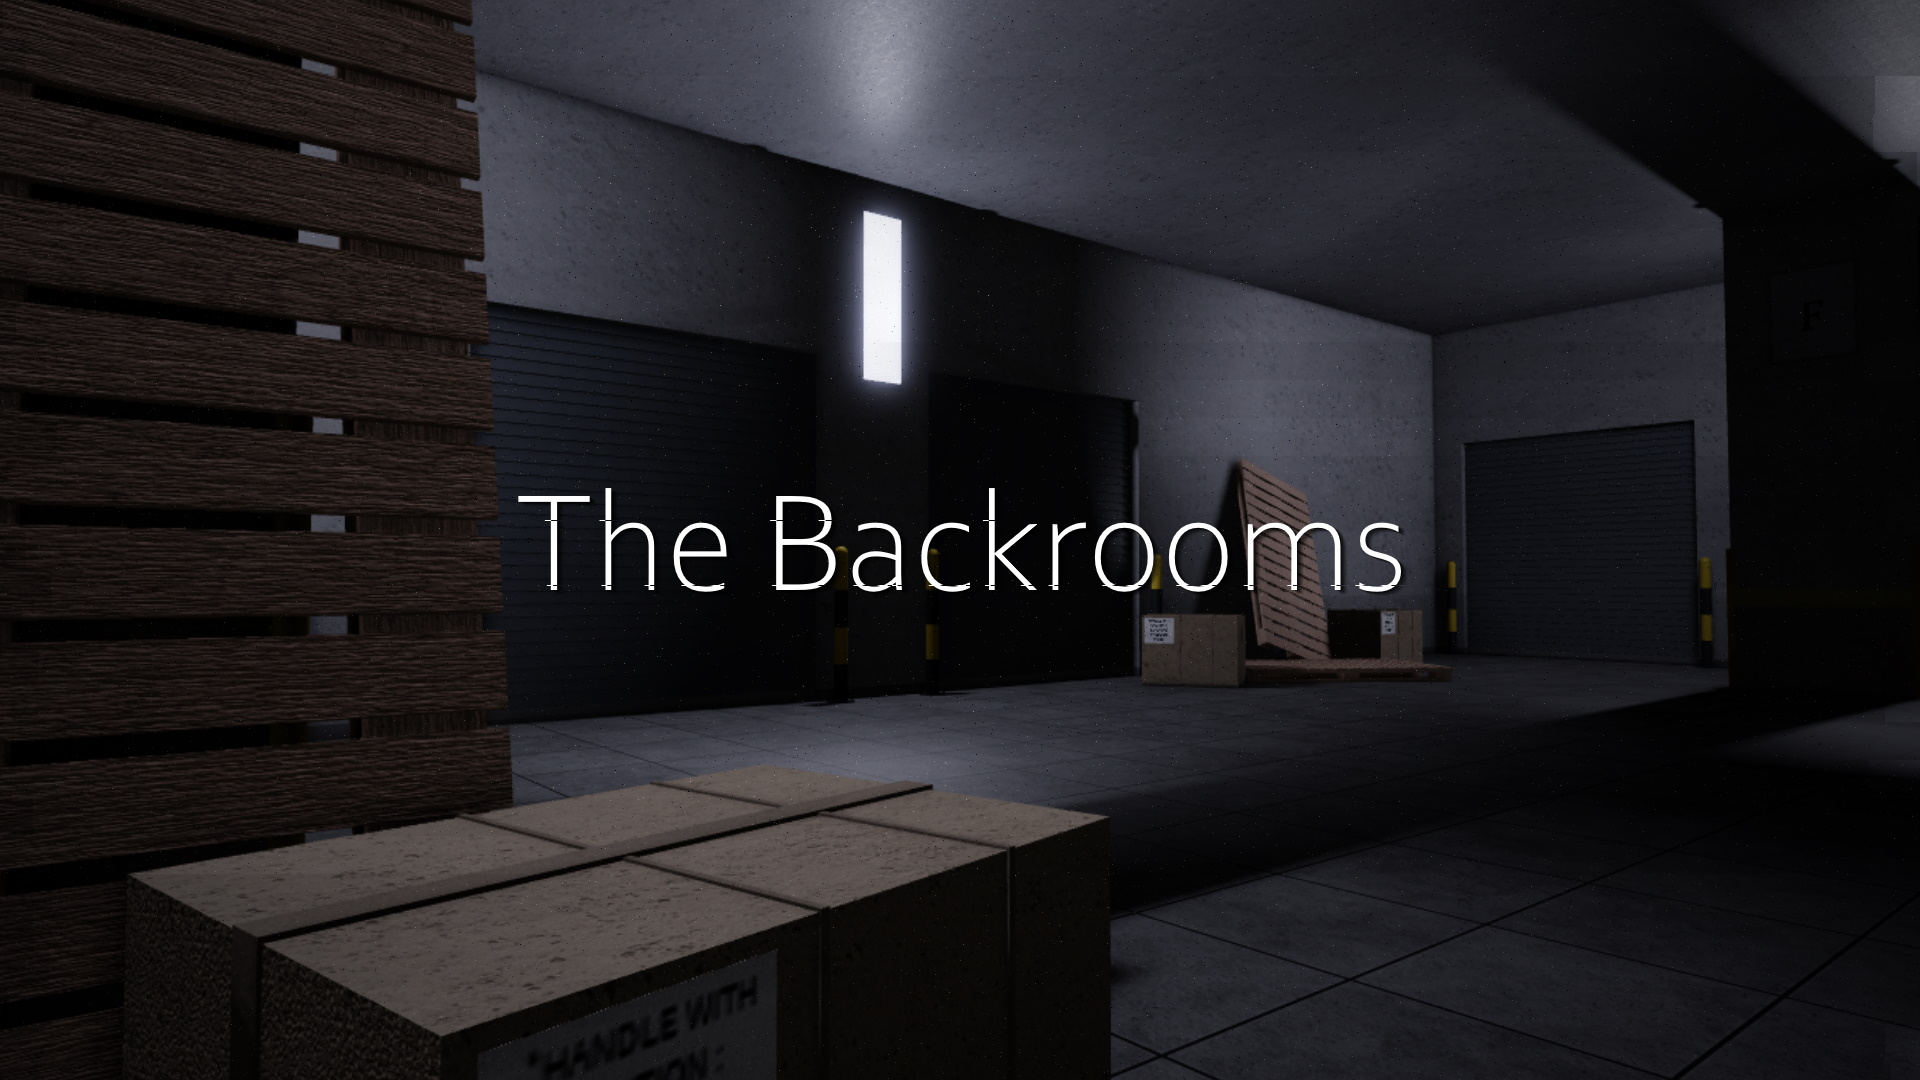 Project : Backrooms on X: -[PROJECT : BACKROOMS - LEVEL 15 TEASER]-  -[Coming in update 2.0.2!]- -[#Roblox #RobloxDev #Backrooms]-   / X